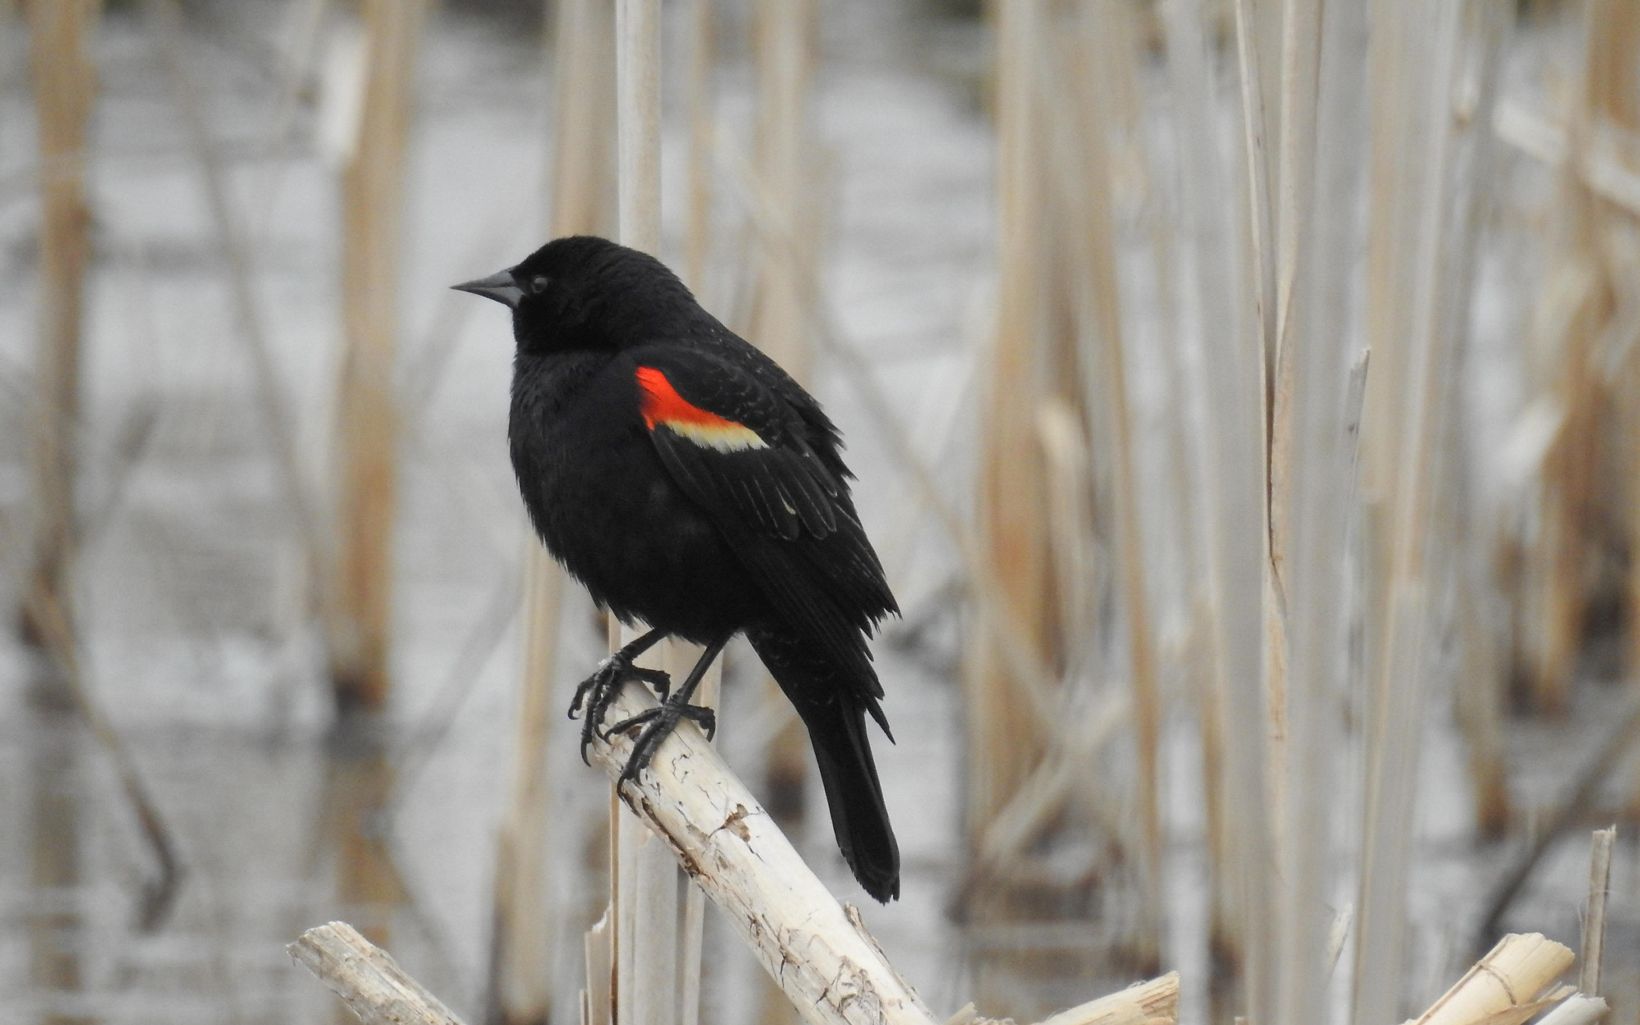 A black bird with red markings rests on a branch.